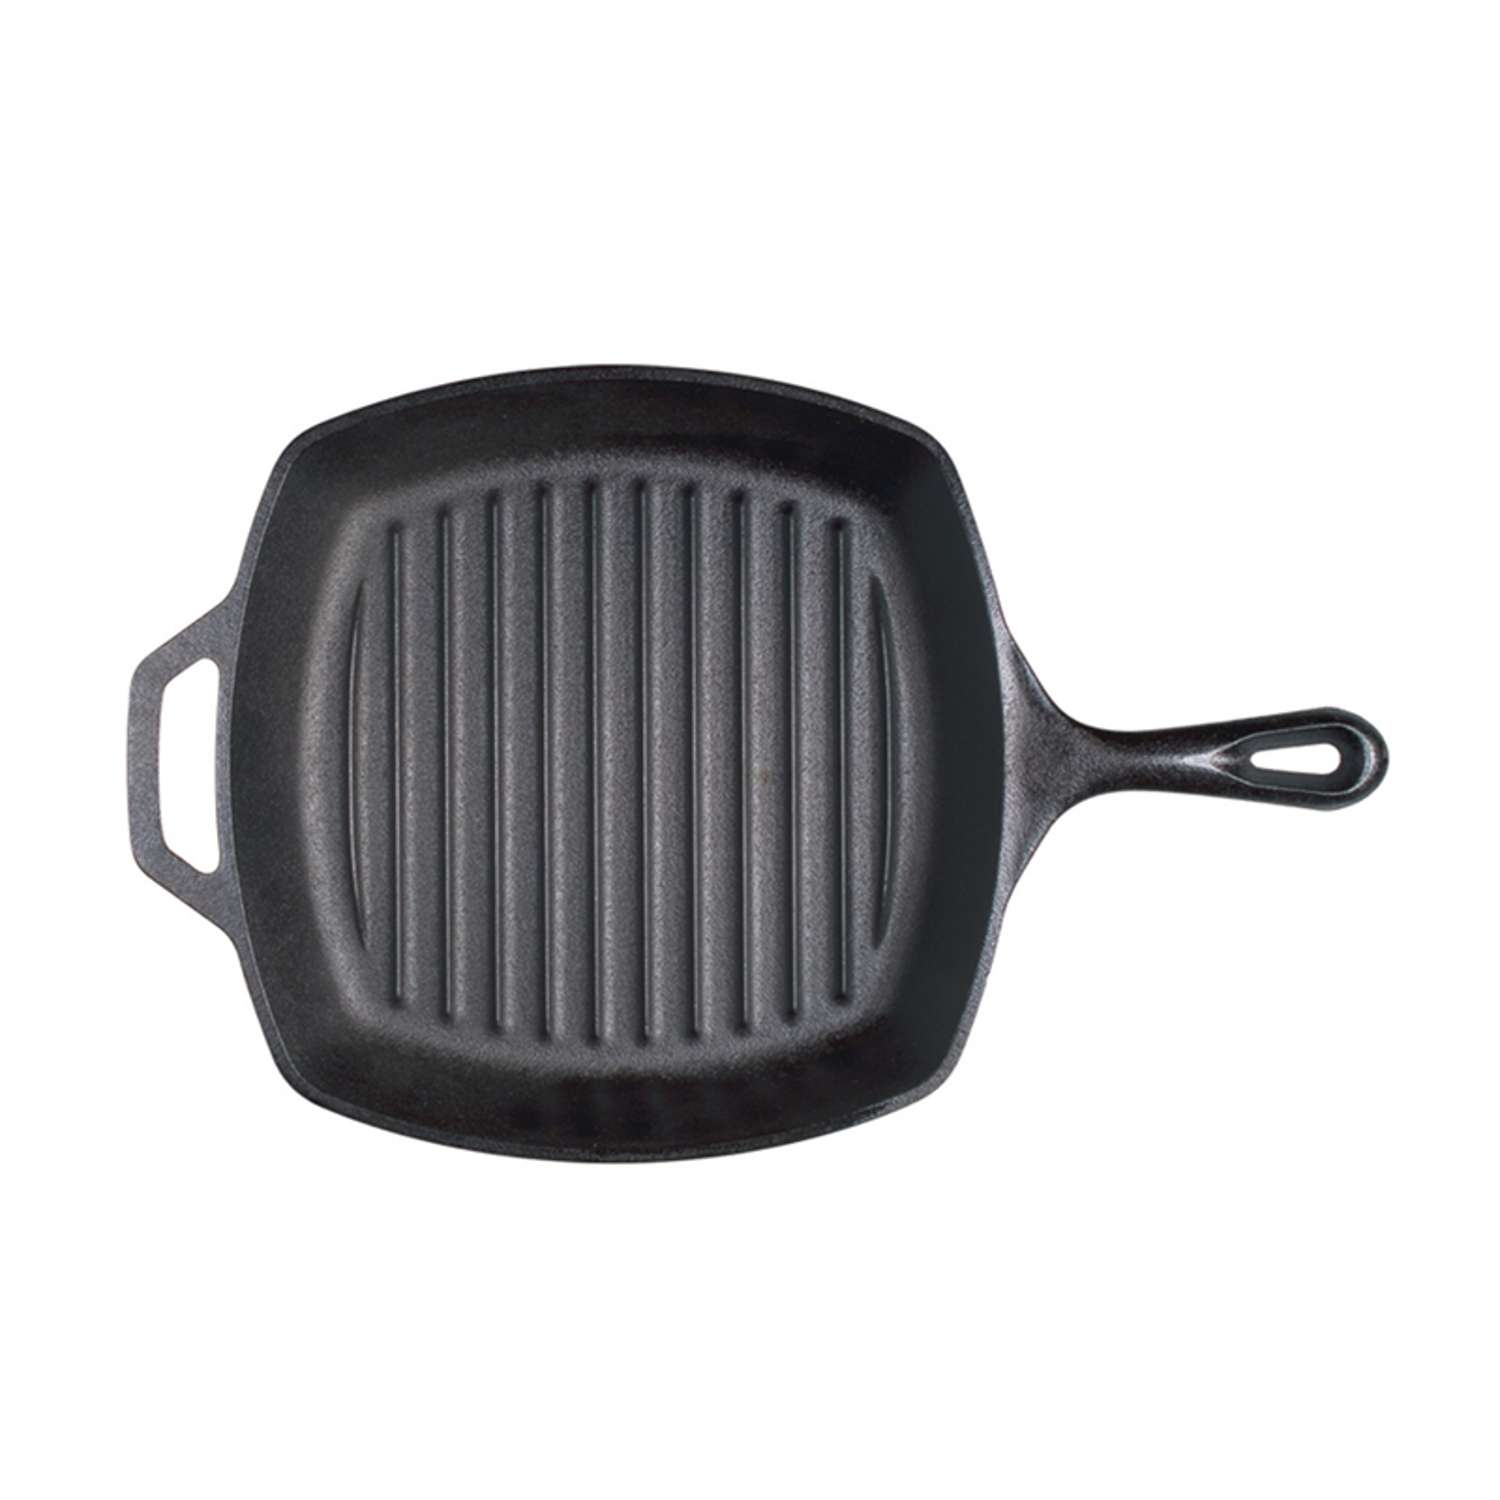 Solved Lodge Company makes cast-iron griddles. The following